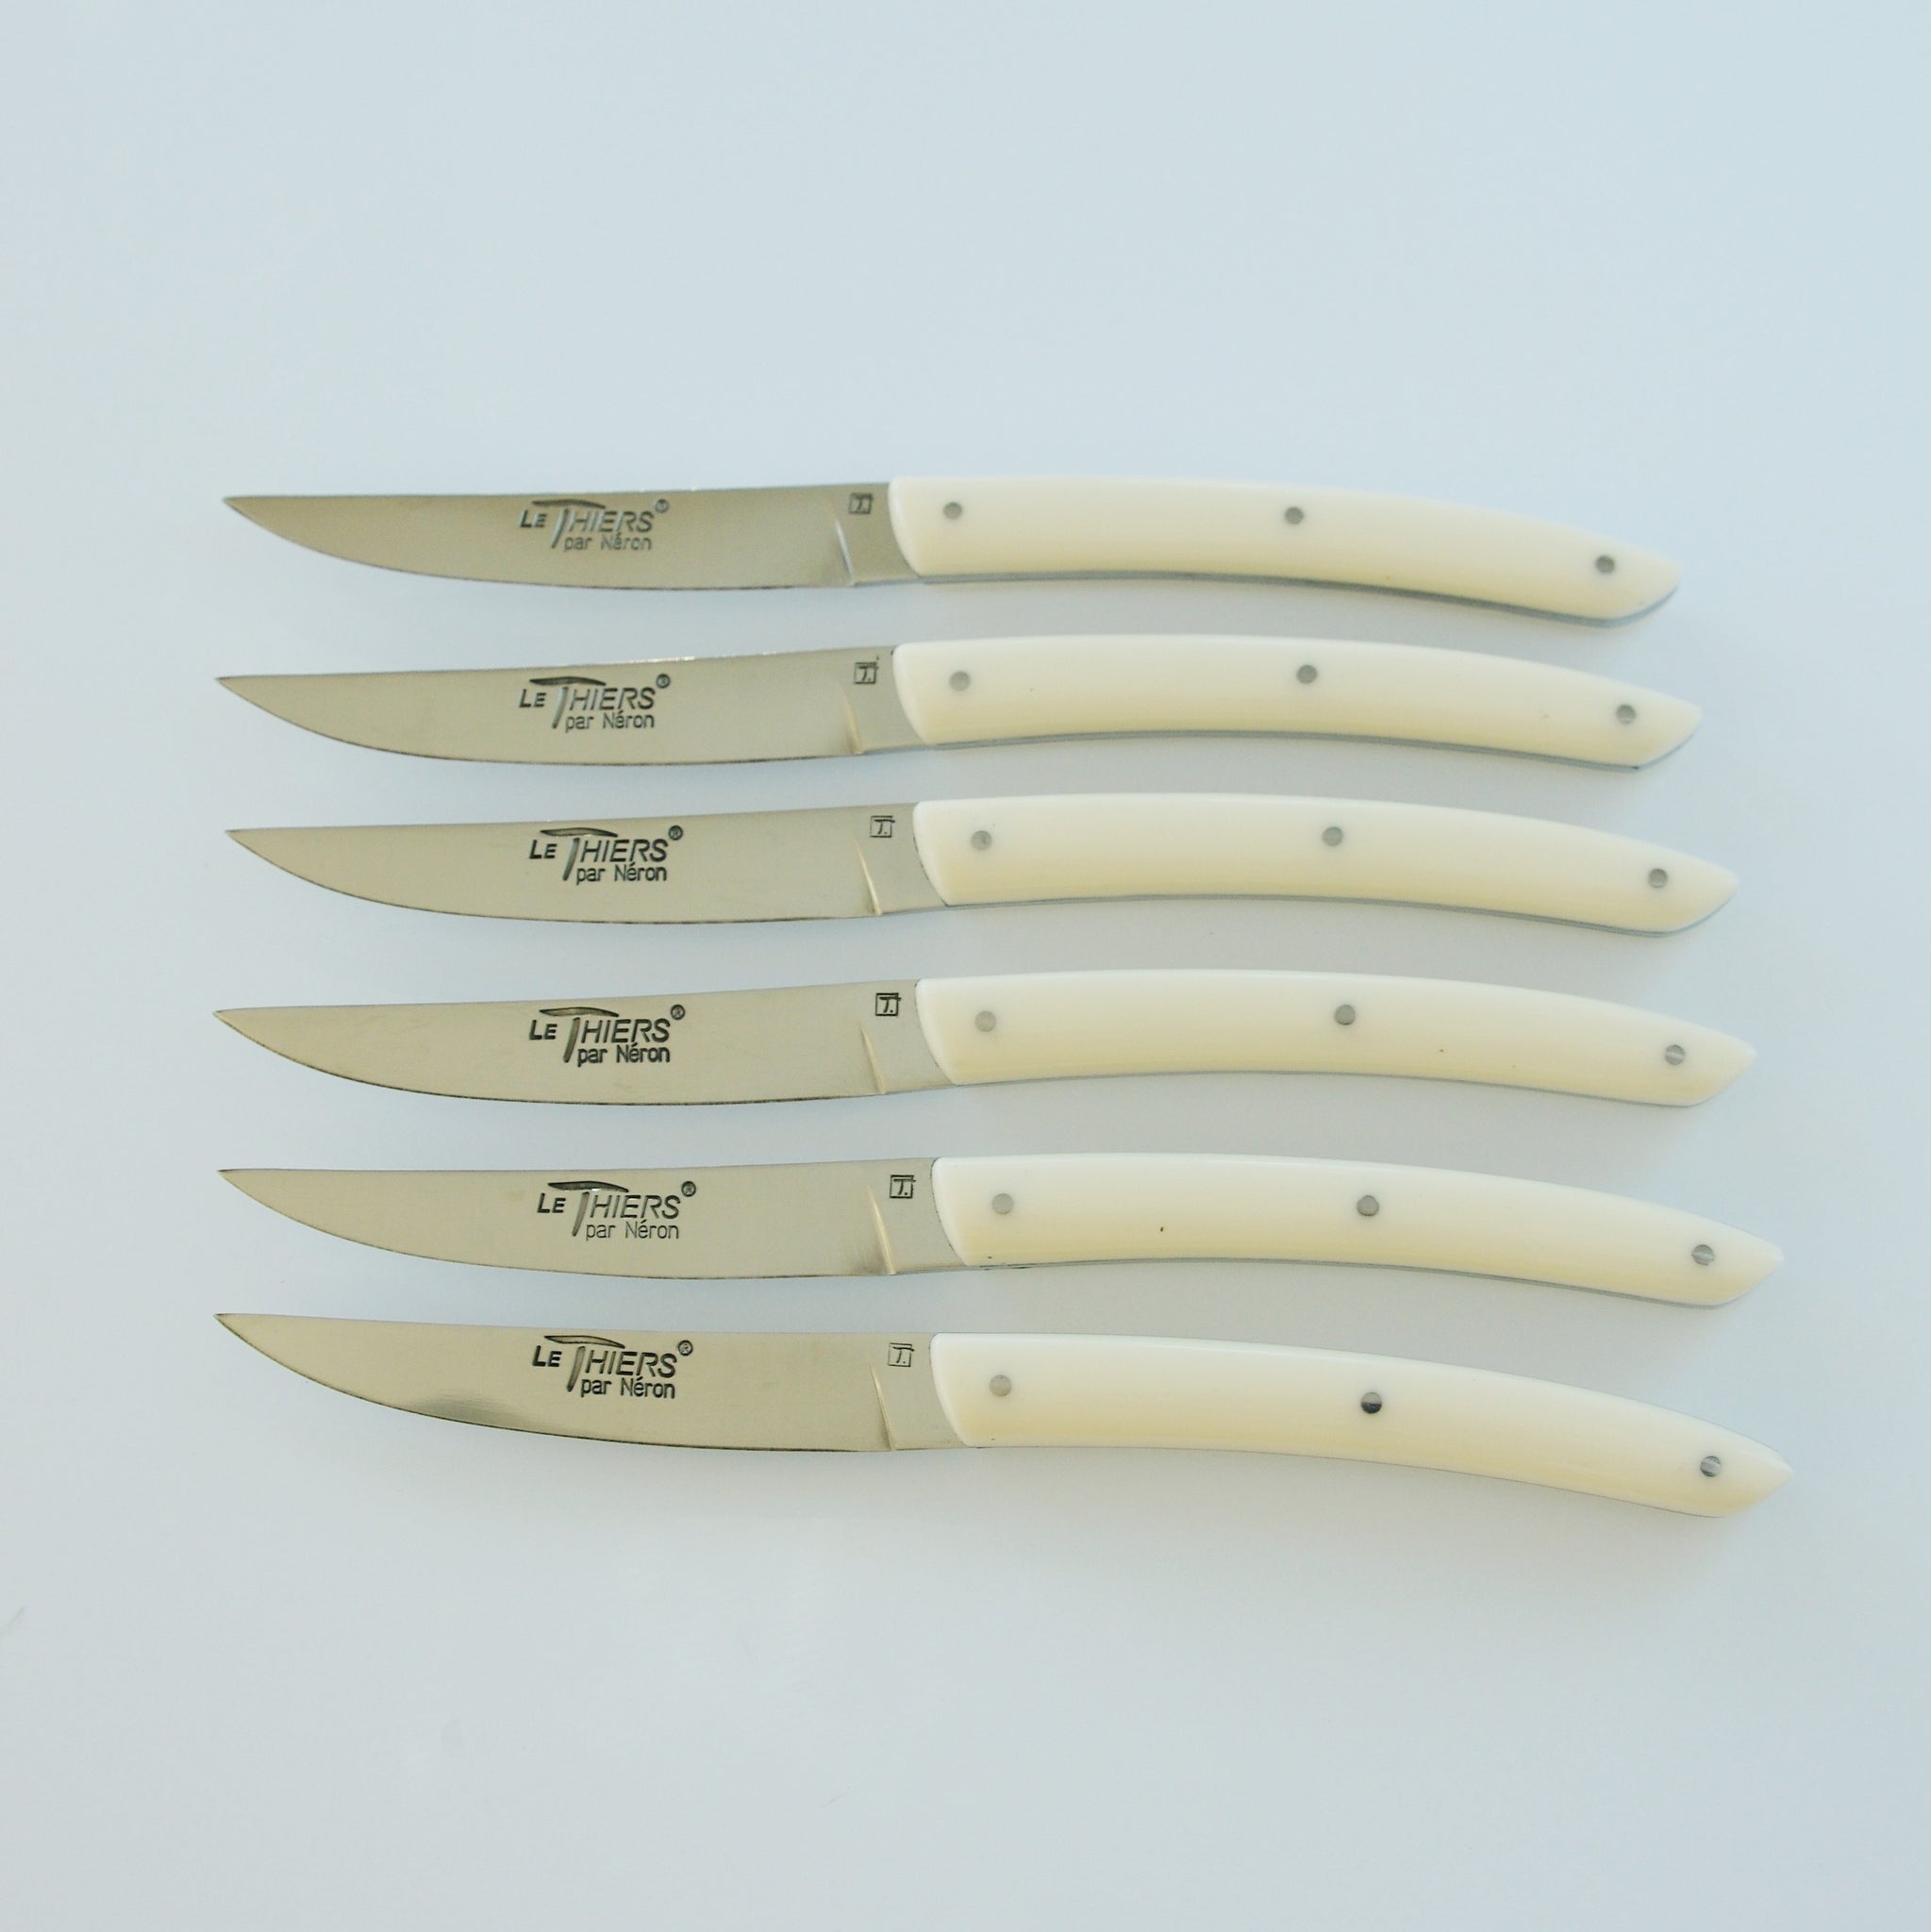 Le Thiers 6 Piece Cream Knife Set in Wooden Gift Box with Acrylic Lid